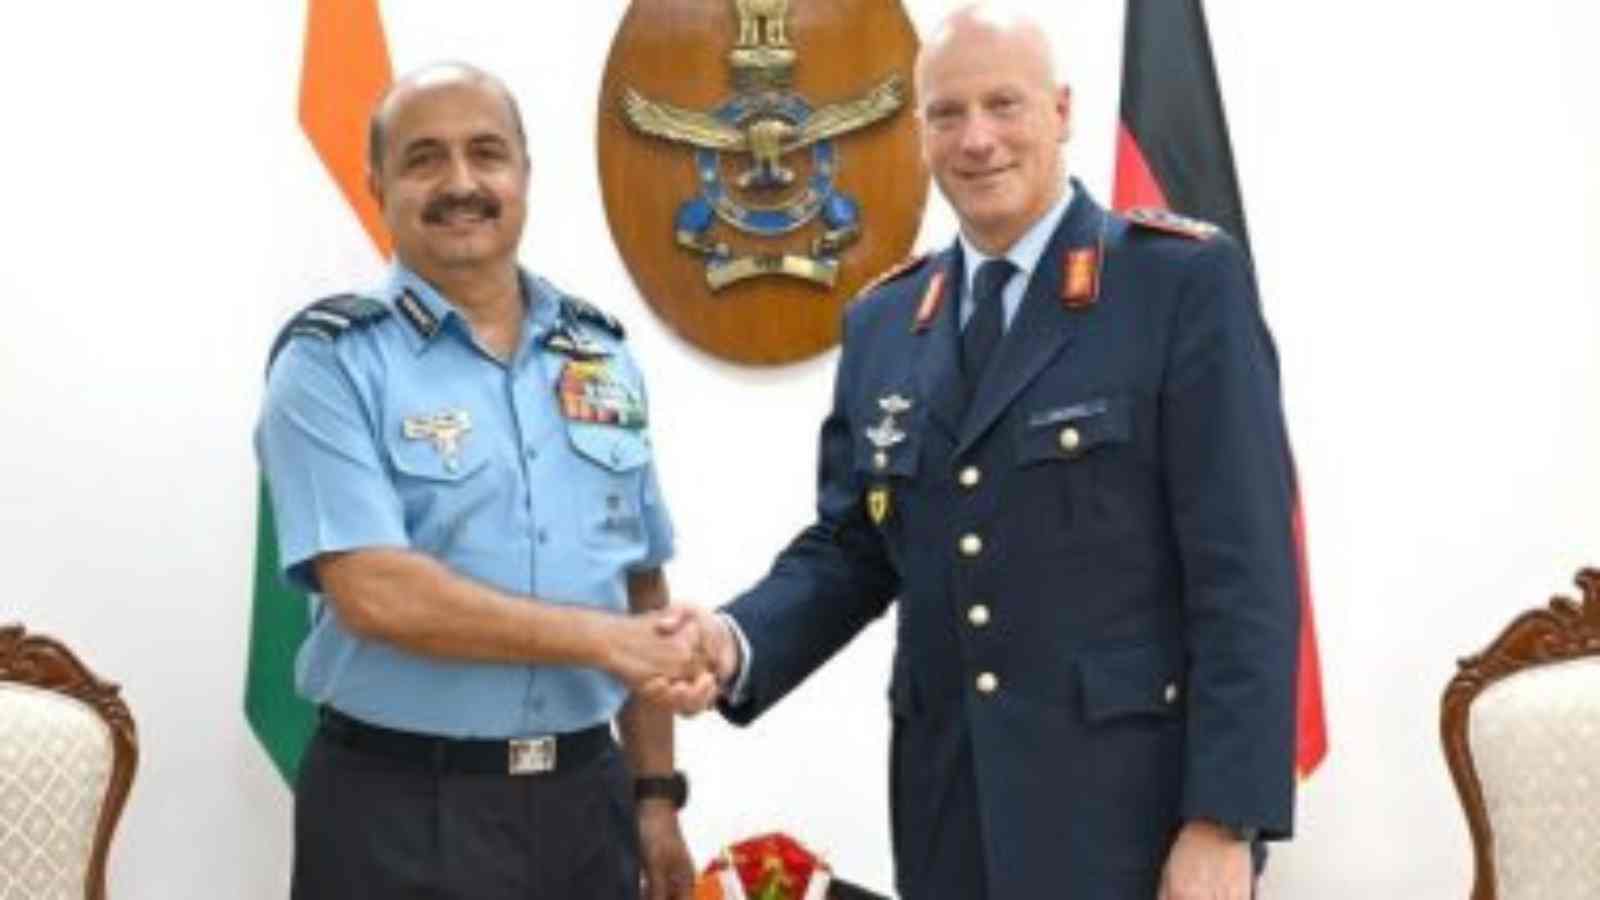 German Cooperation with Indian Air Force: Discussion on enhancing both the air forces.